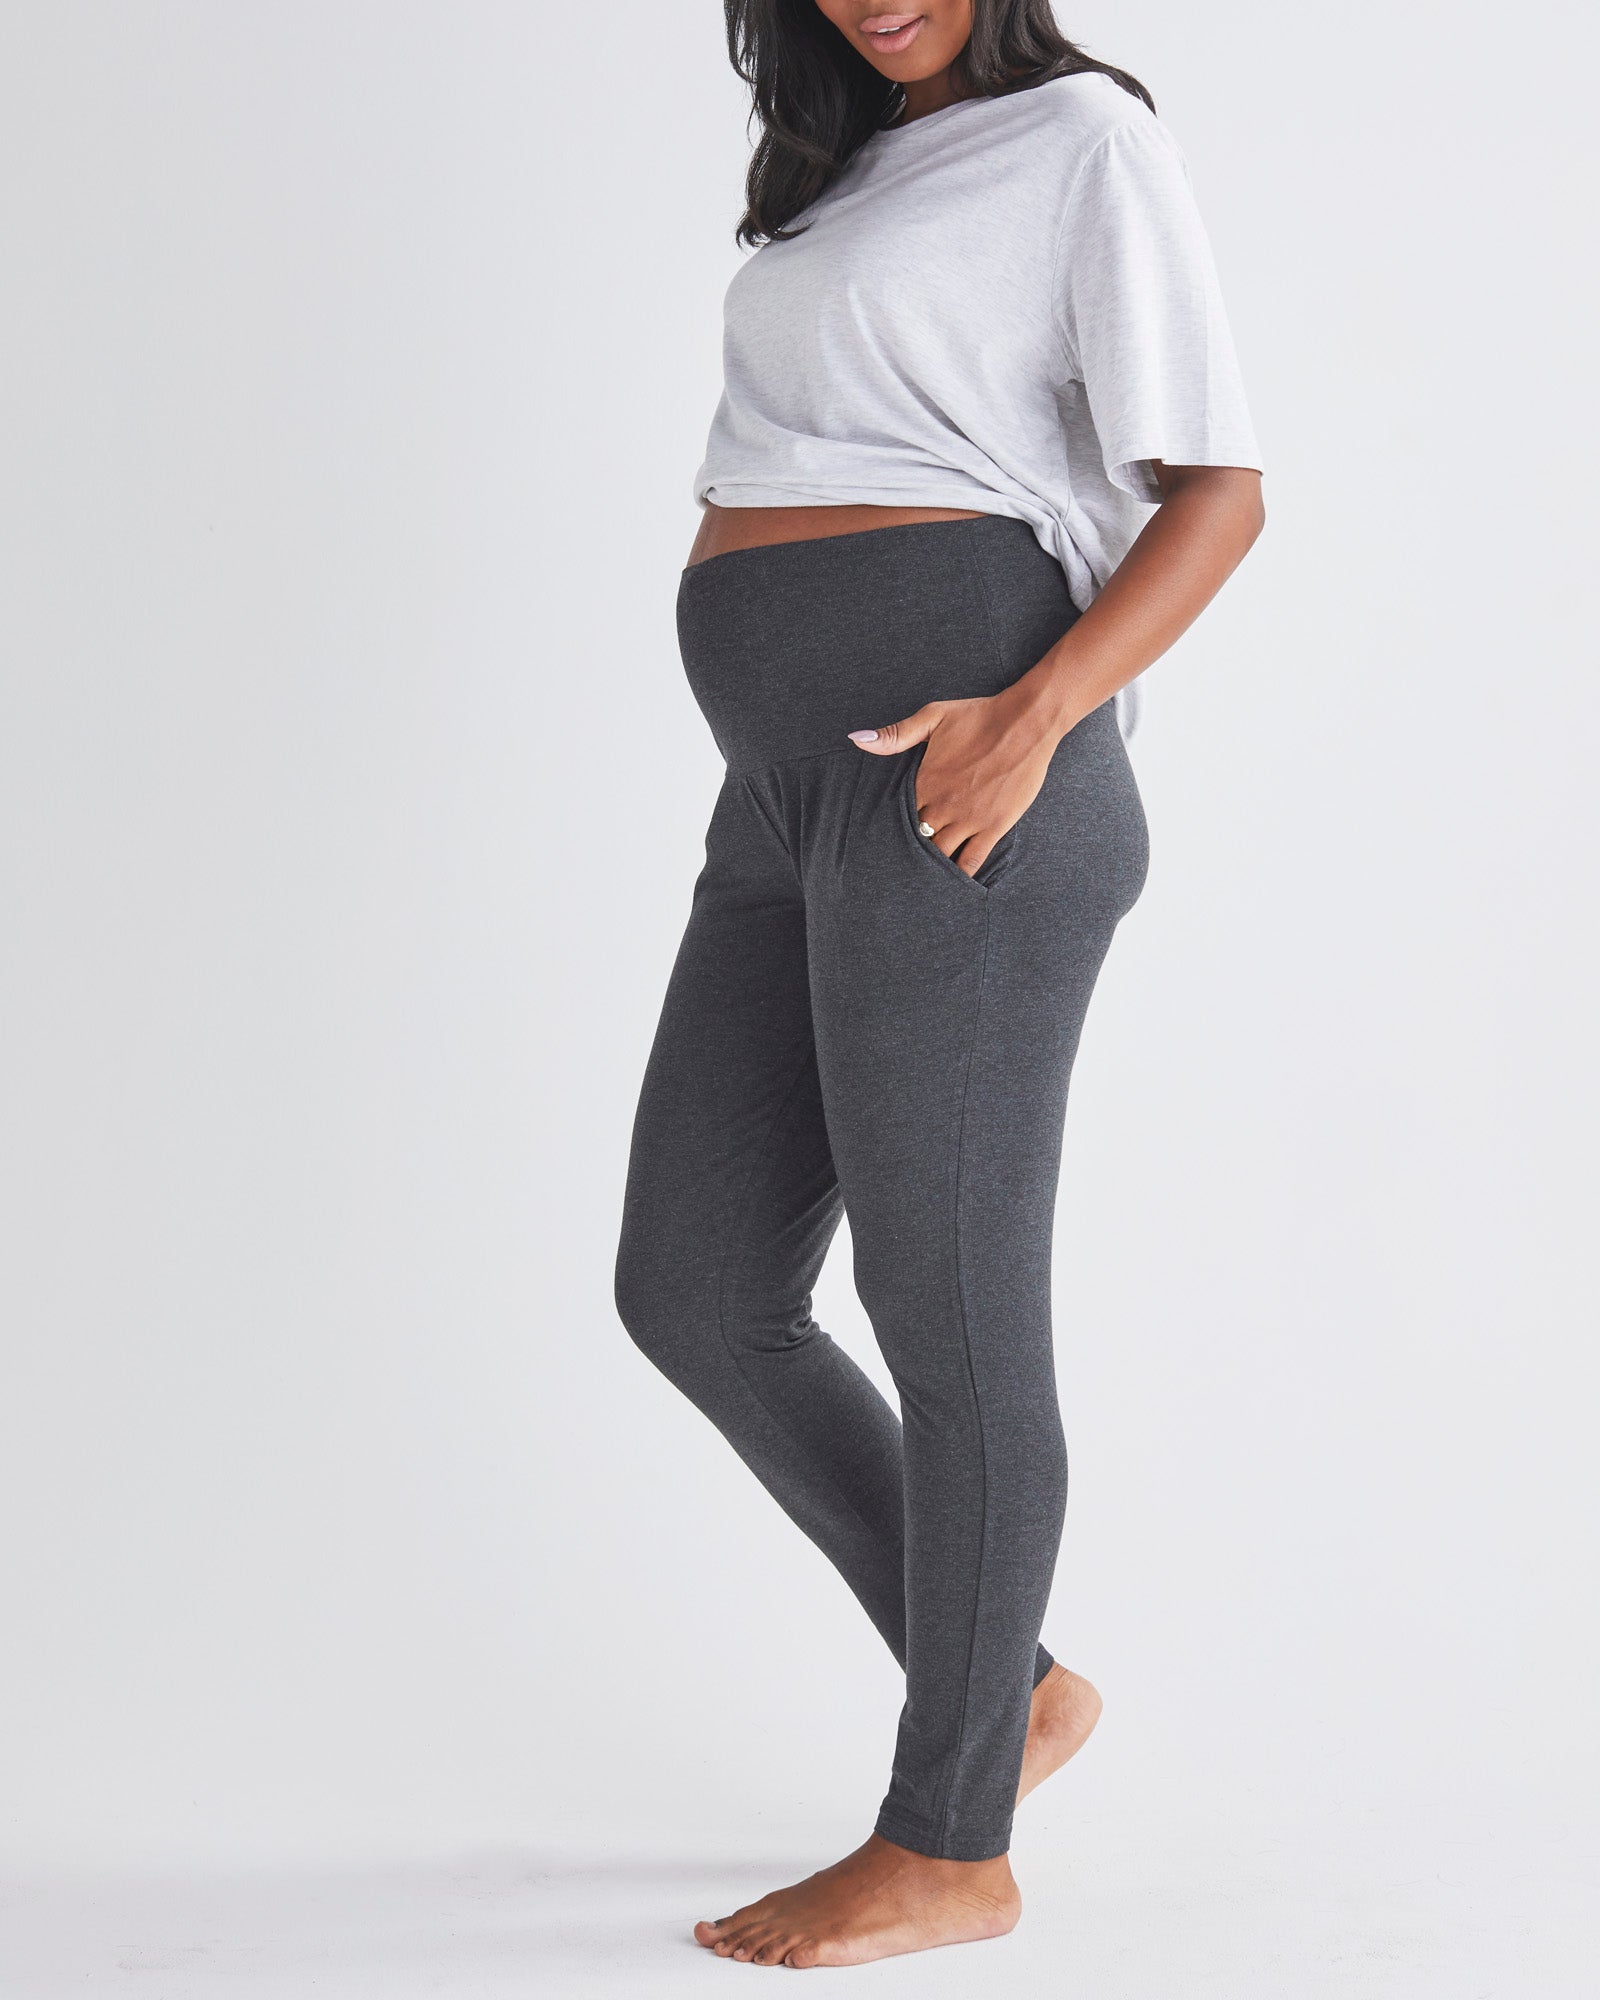 Side View - A Pregnannt Woman Wearing Eden Ultra Soft Maternity Lounge Pants in Charcoal from Angel Maternity.